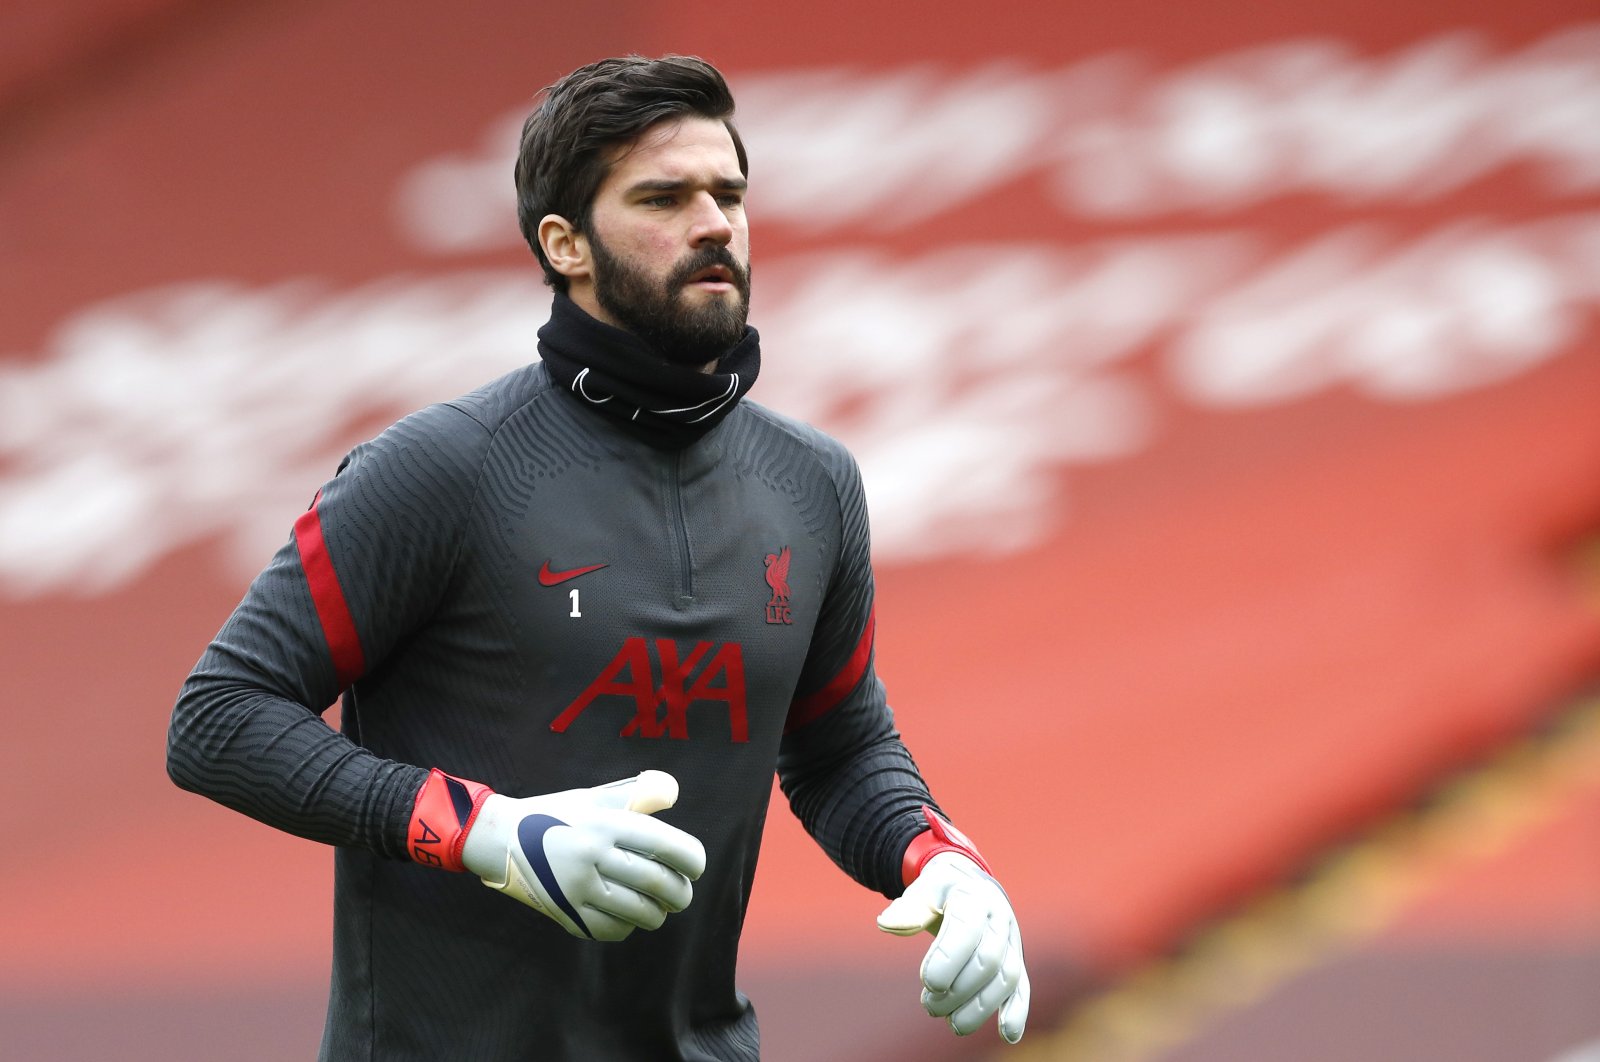 Liverpool's goalkeeper Alisson warms up prior to their English Premier League match against Fulham at Anfield, Liverpool, England, March 7, 2021.